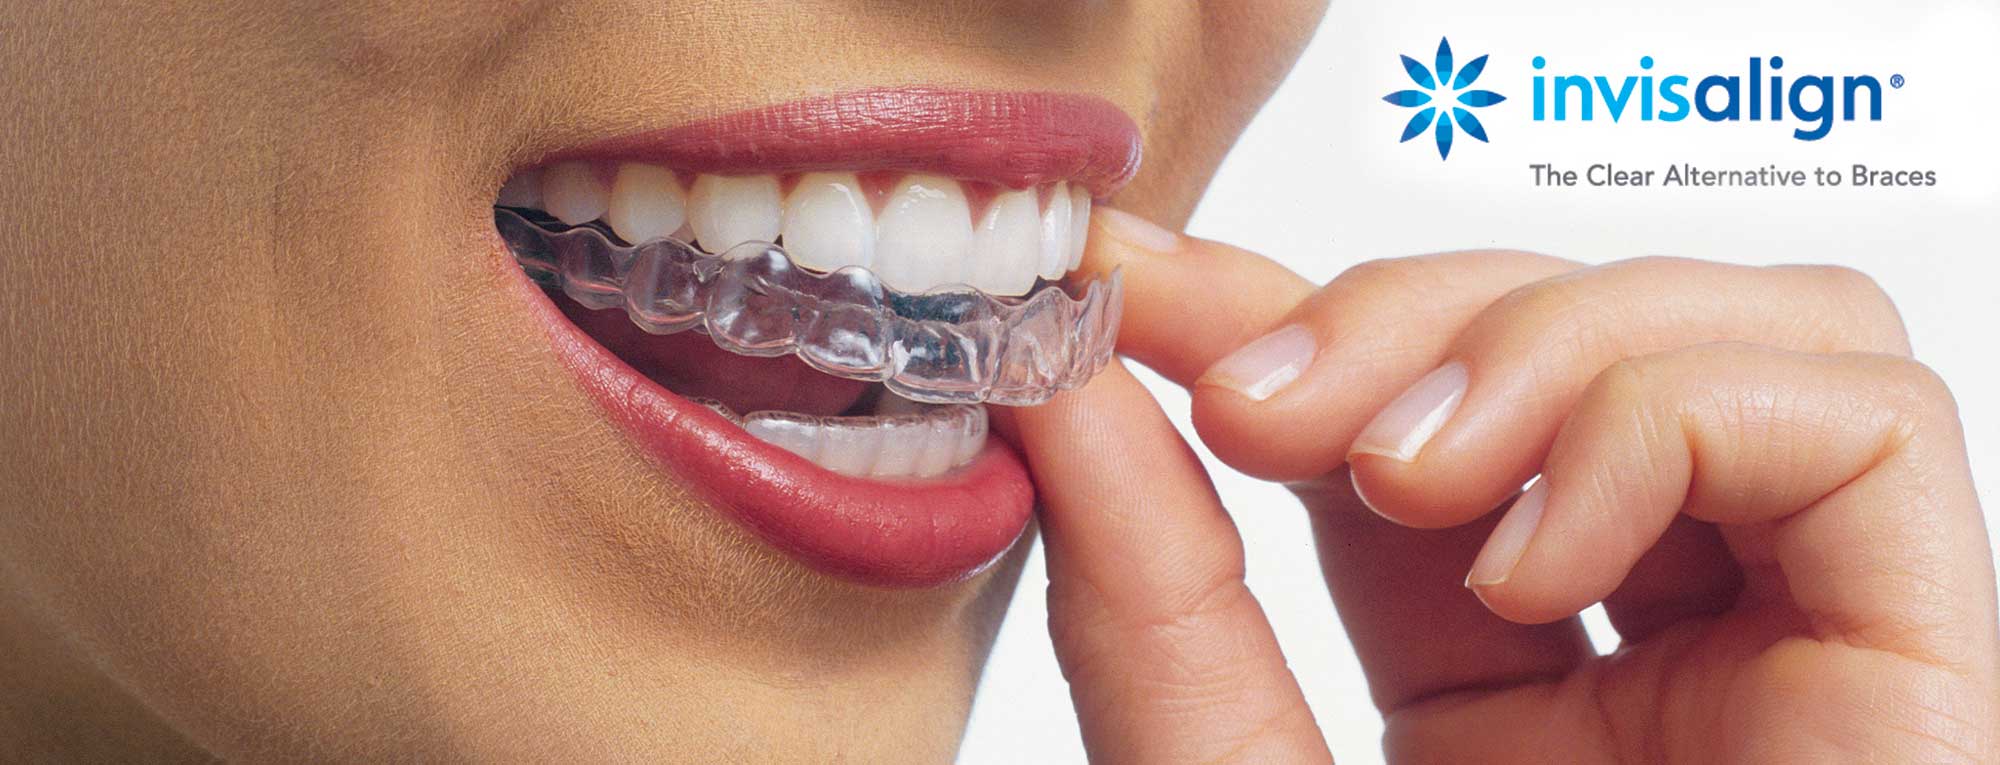 Should I Get Invisalign (Clear Aligners) or Braces?